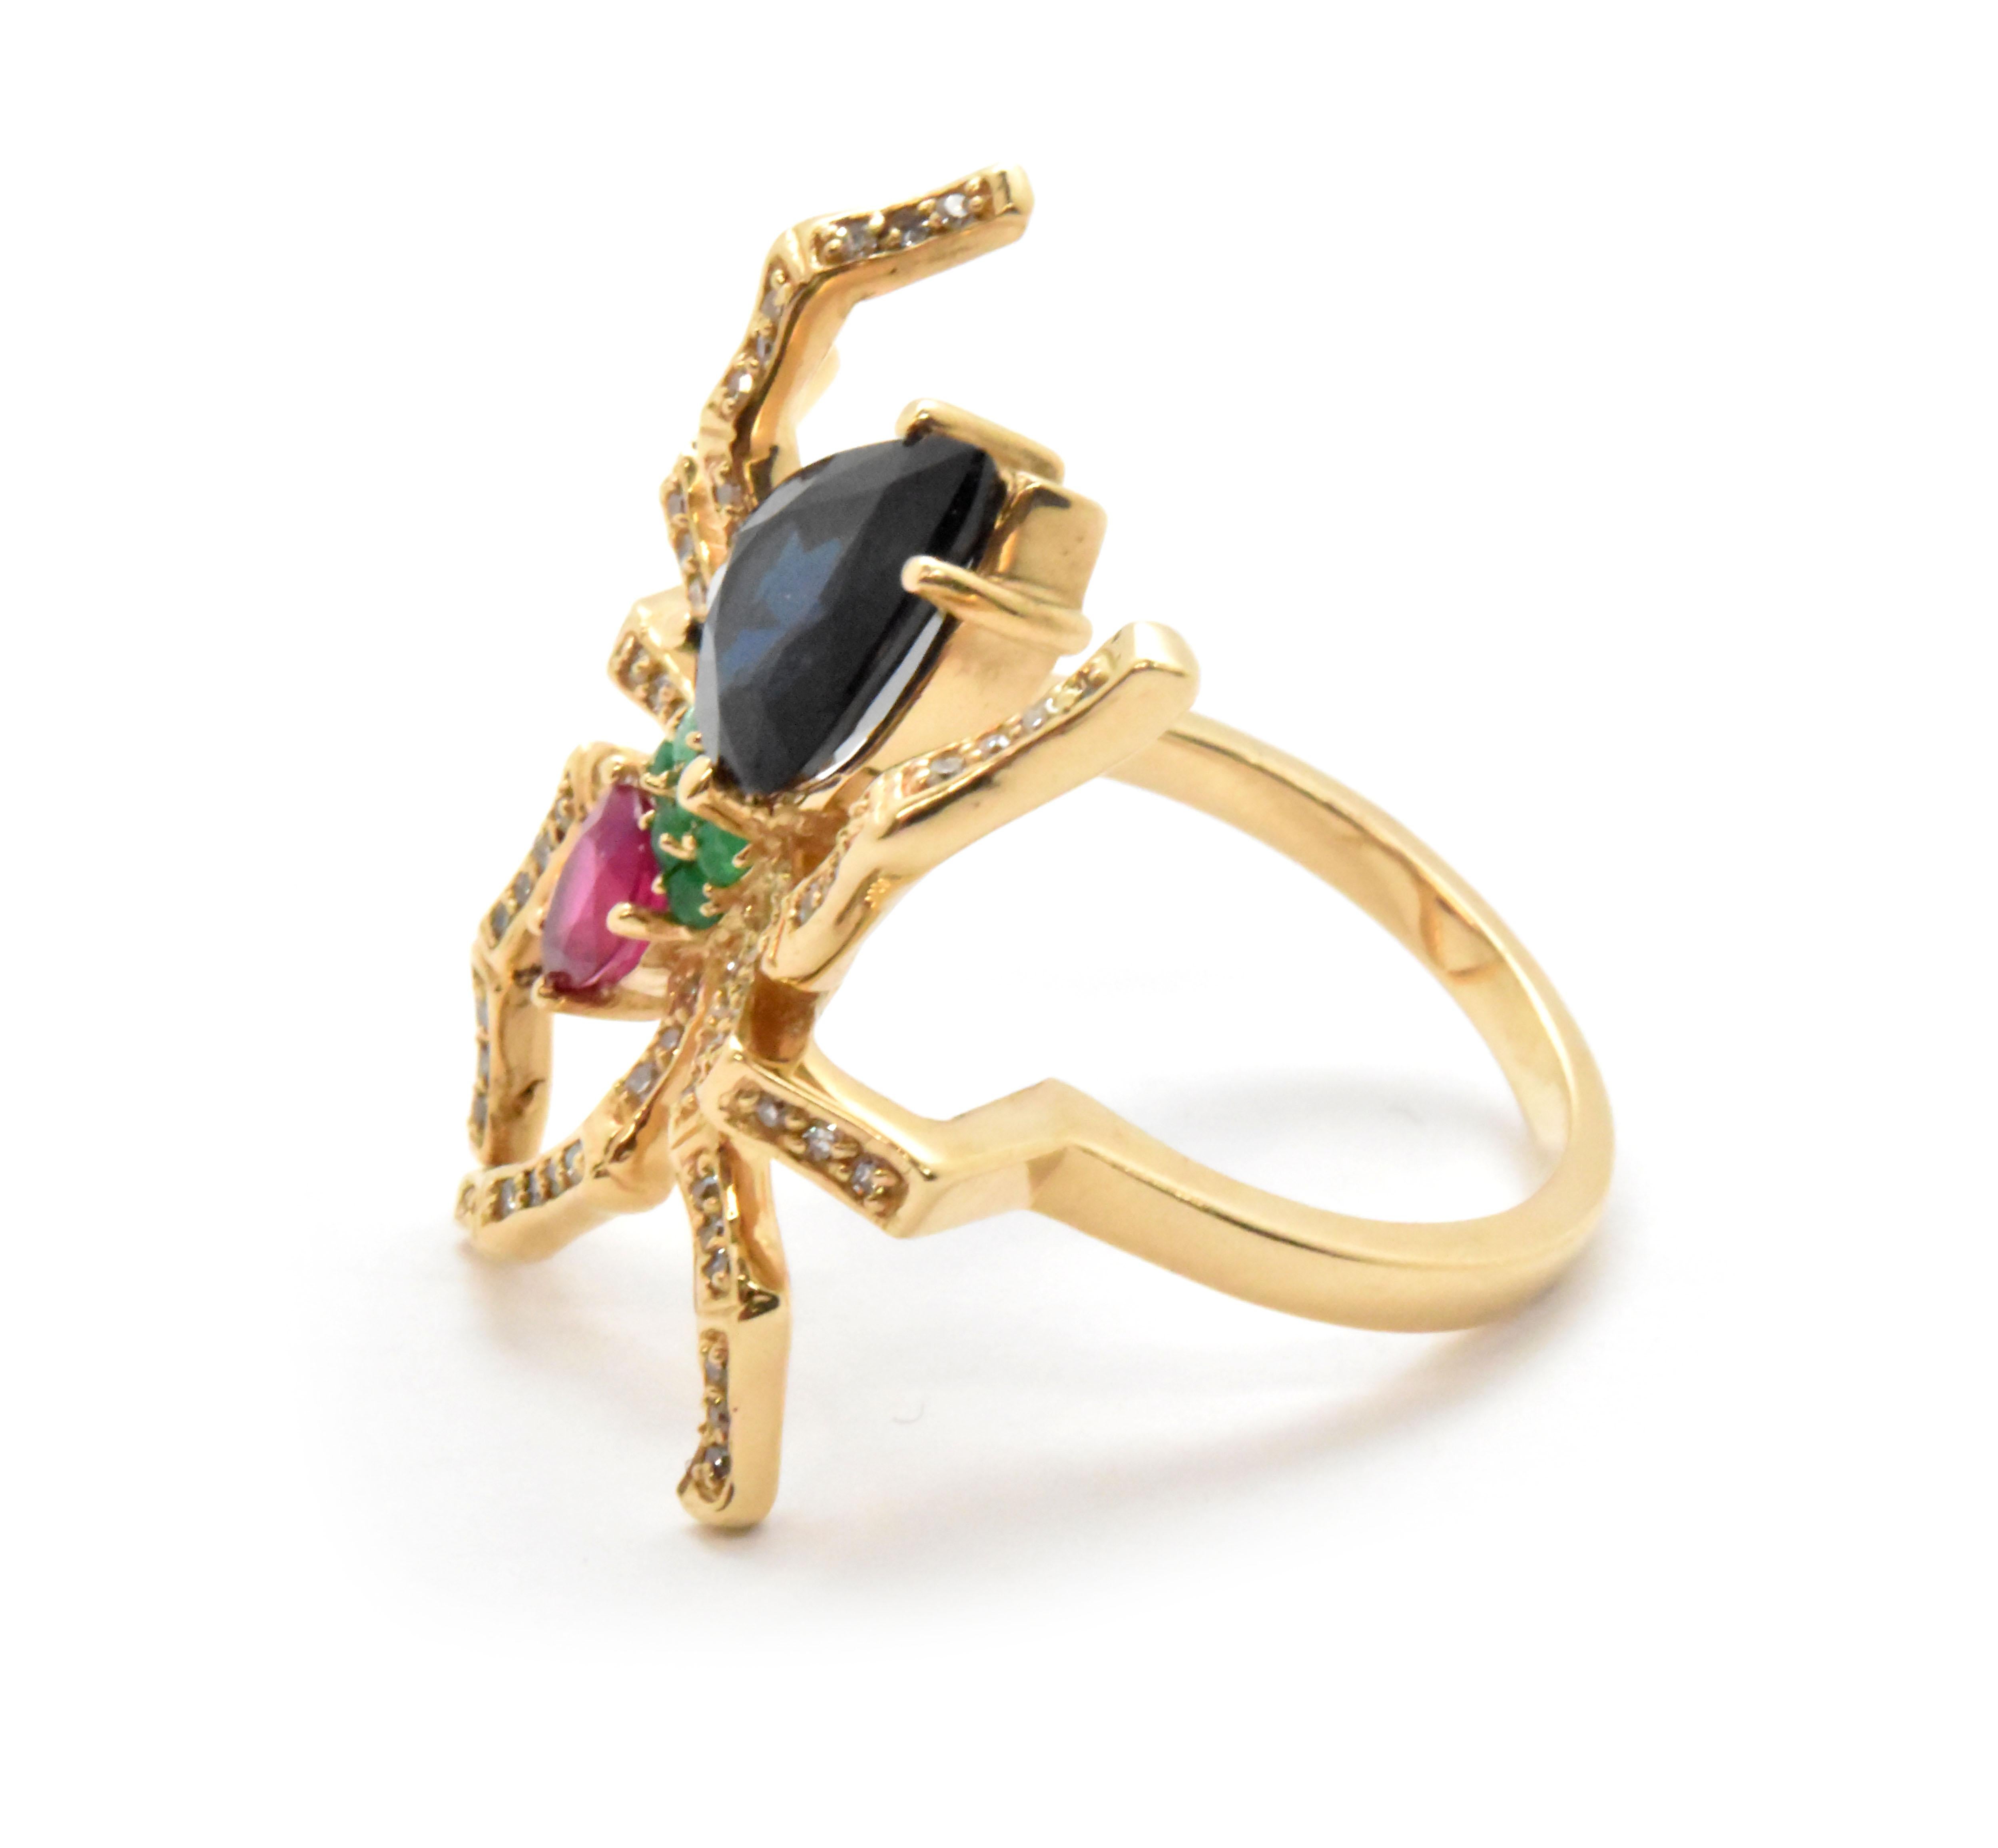 gold spider ring